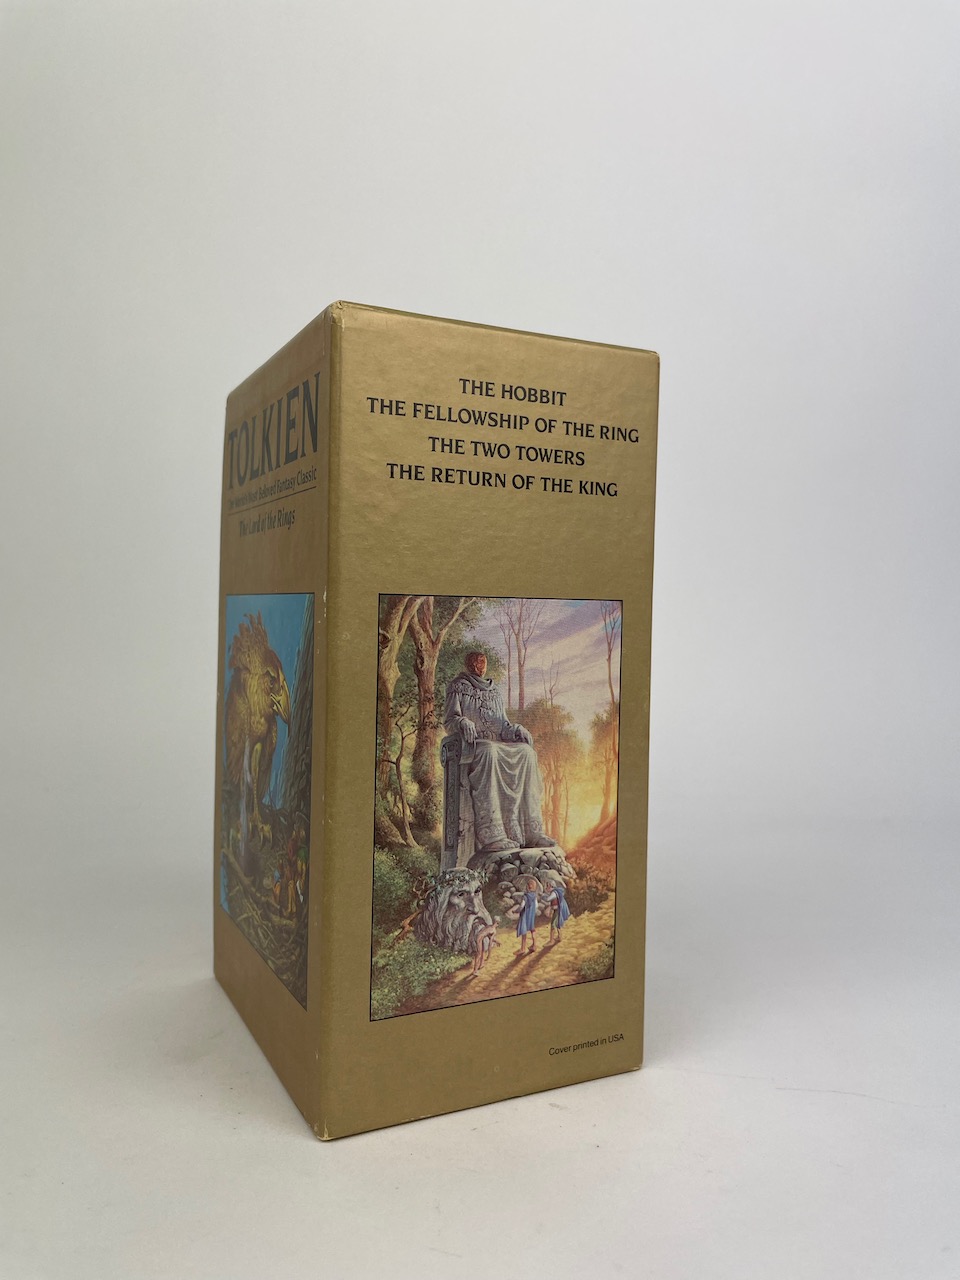 The Lord of the Rings and The Hobbit set from 1984, by Ballantine Books, New York 5